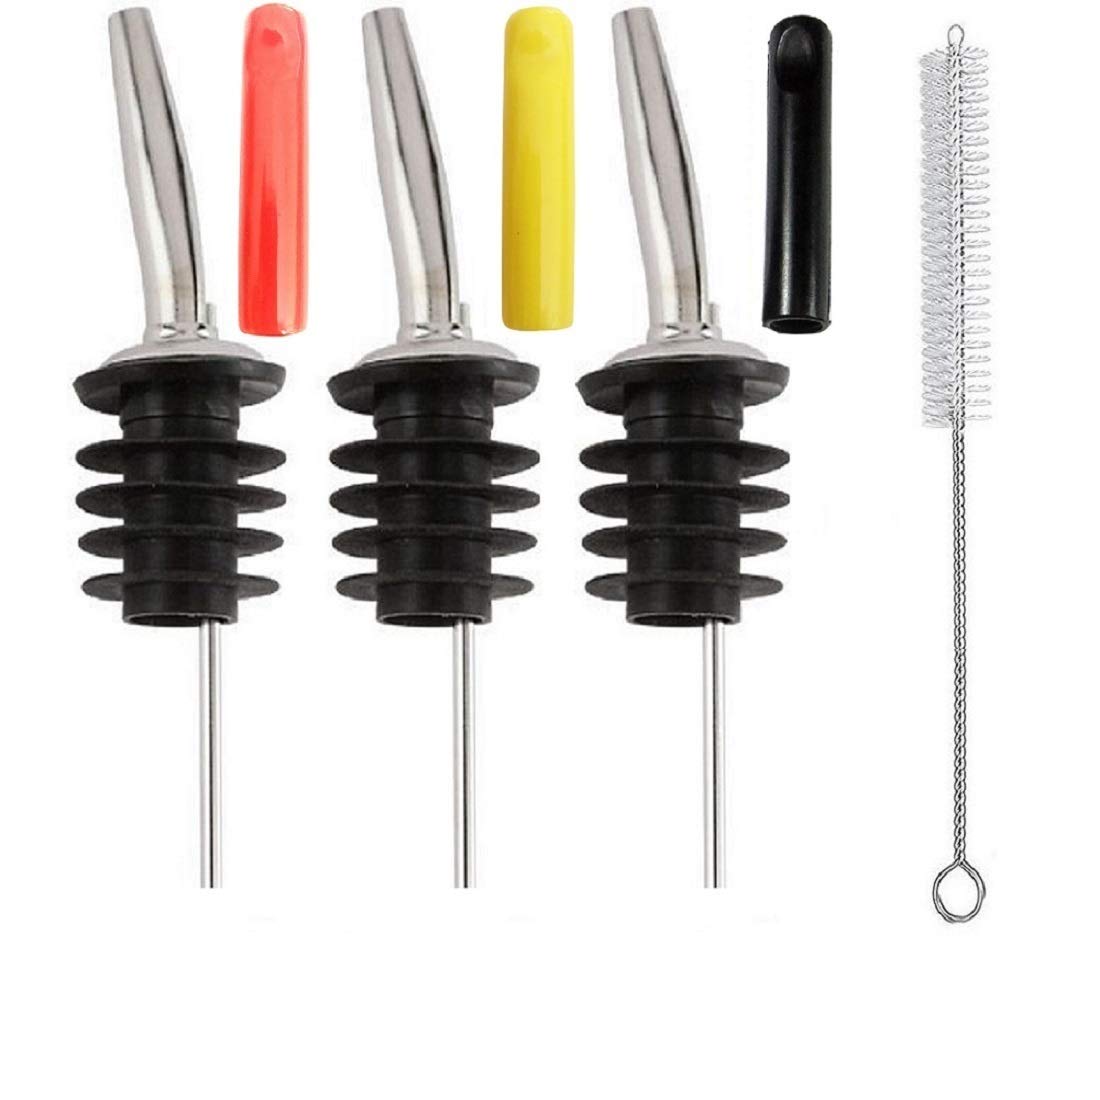 NJ Metal Bottle Pourers for Olive Oil, Pouring Spouts for Liquor, Wine and Spirits Perfect for Restaurant, Bar, Hotel, Kitchen Use Red,Yellow,Black Dust Covers and Free Cleaning Brush - Pack of 7